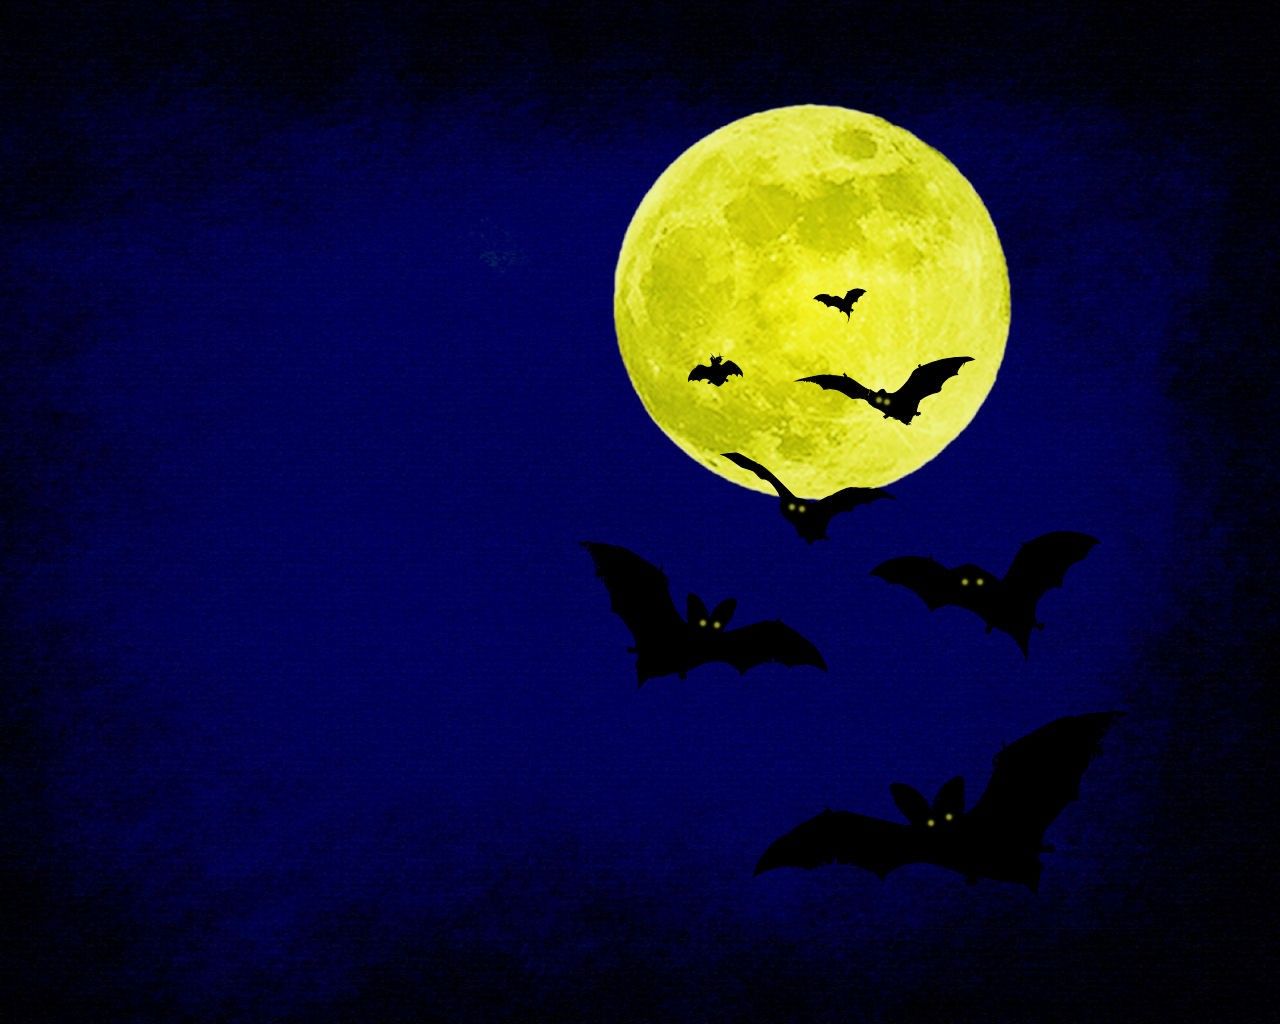 Scary Halloween 2012 HD Wallpapers | Pumpkins, Witches, Spider Web ...